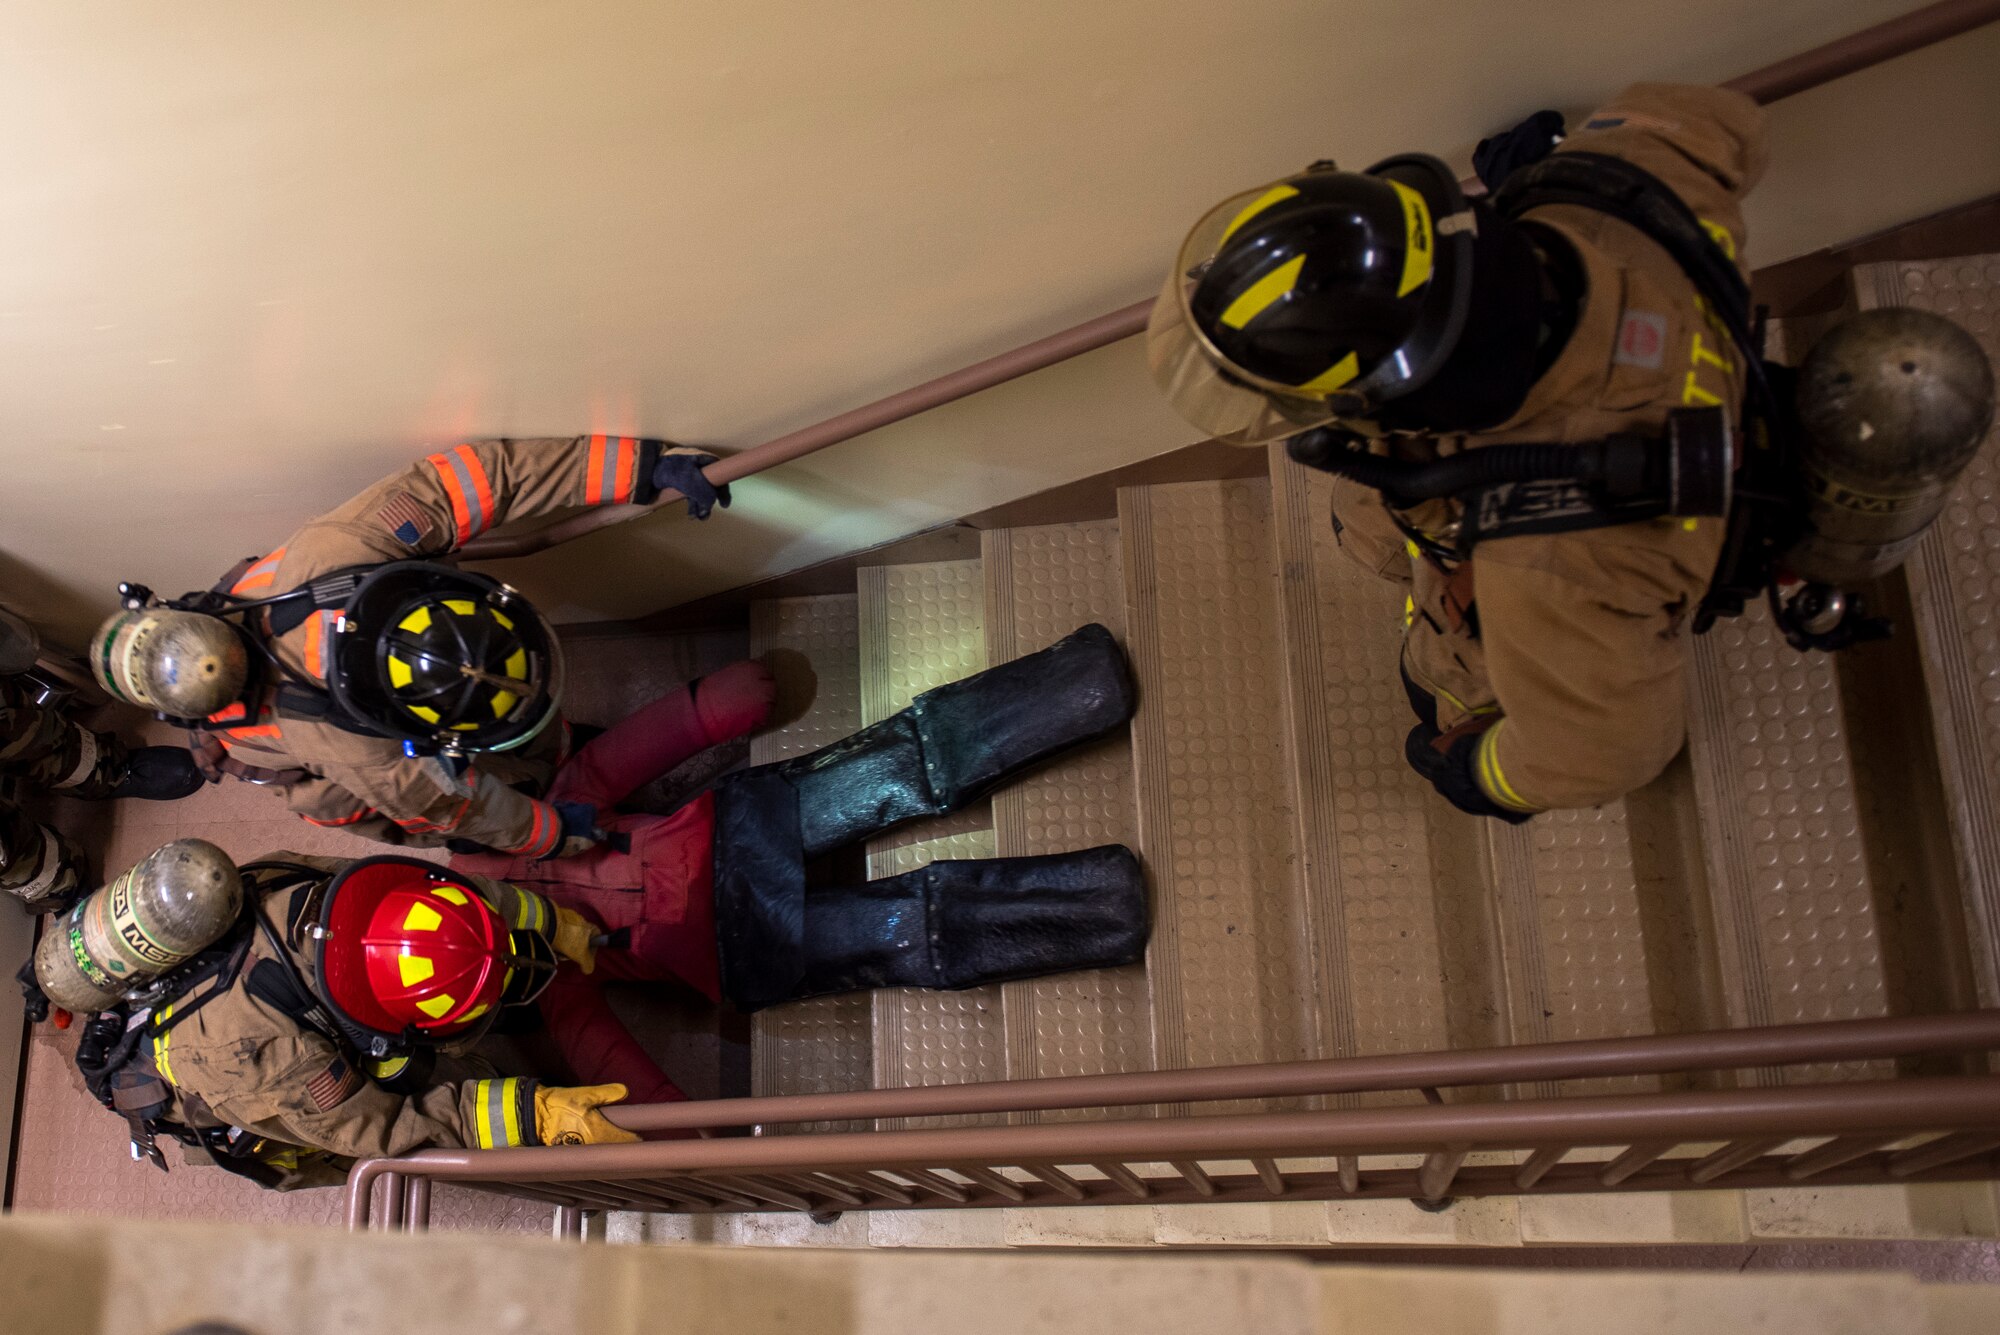 51st CES firefighters responded to a series of training scenarios to ensure all safety procedures are consistently adhered to in timely manner